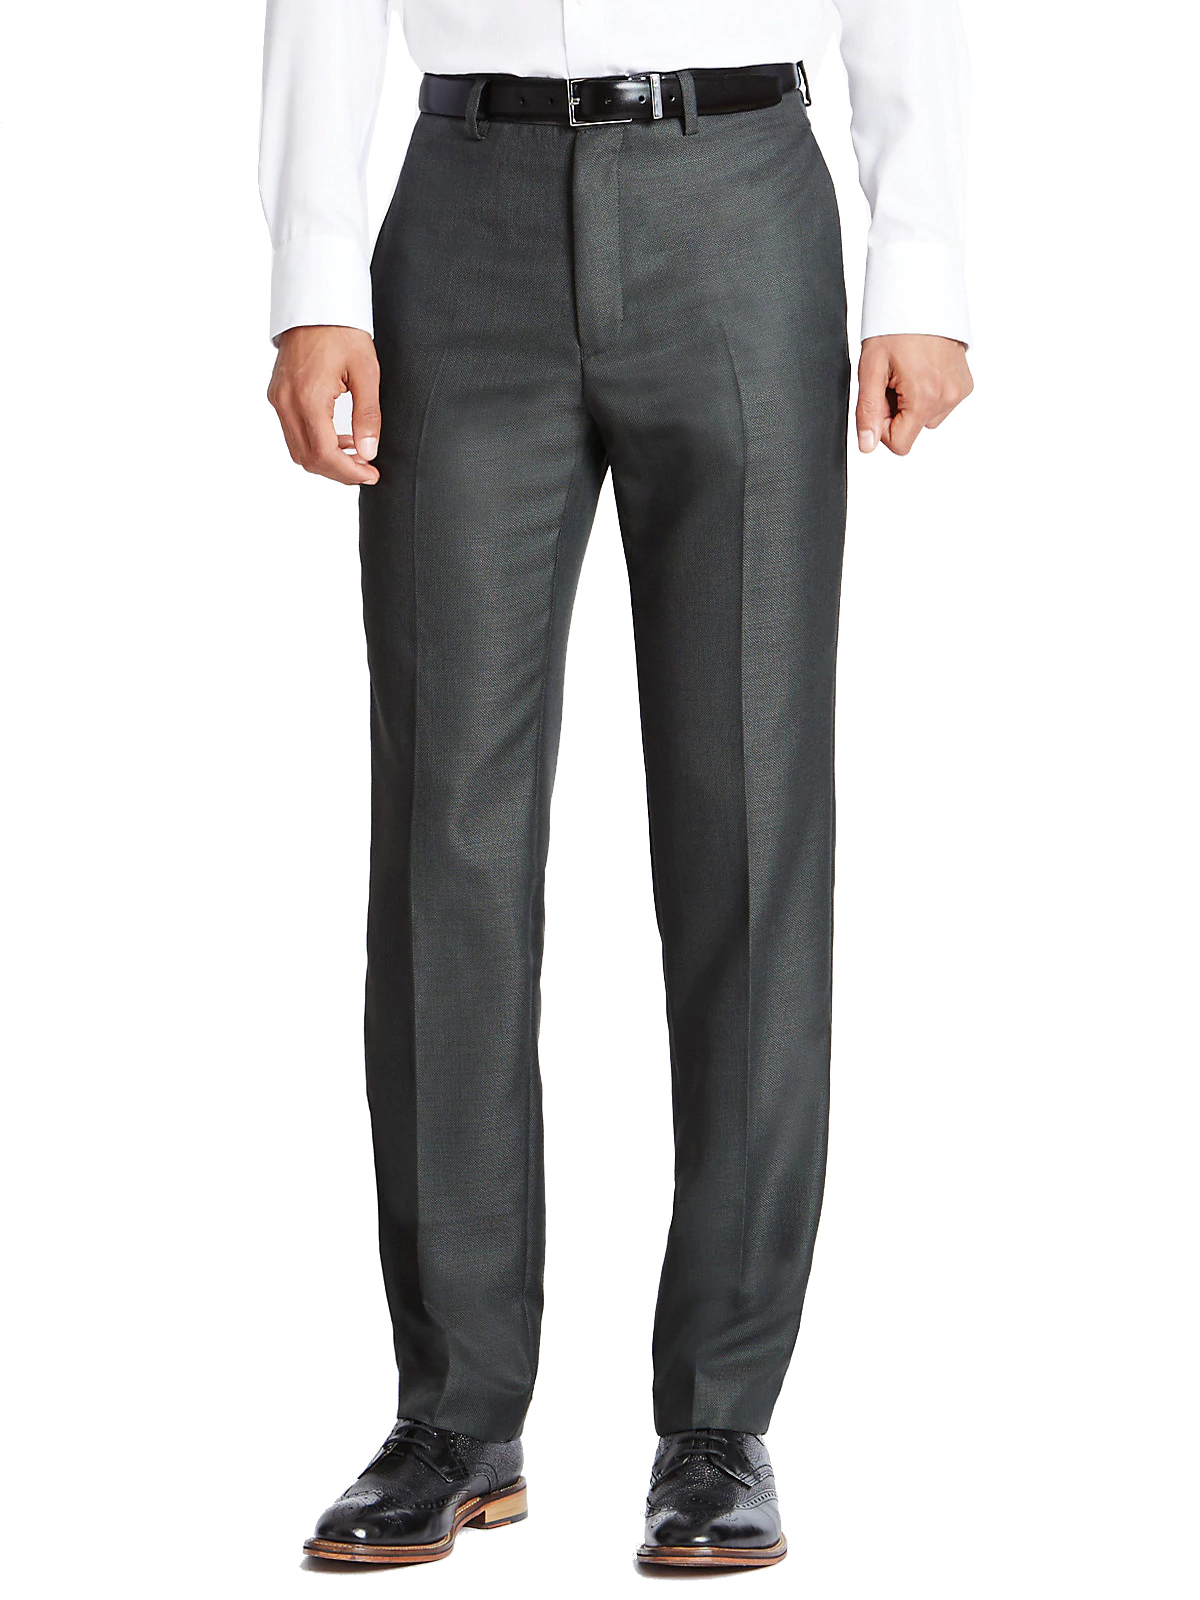 Marks and Spencer - - M&5 GREY Supercrease Flat Front Trousers - Waist ...